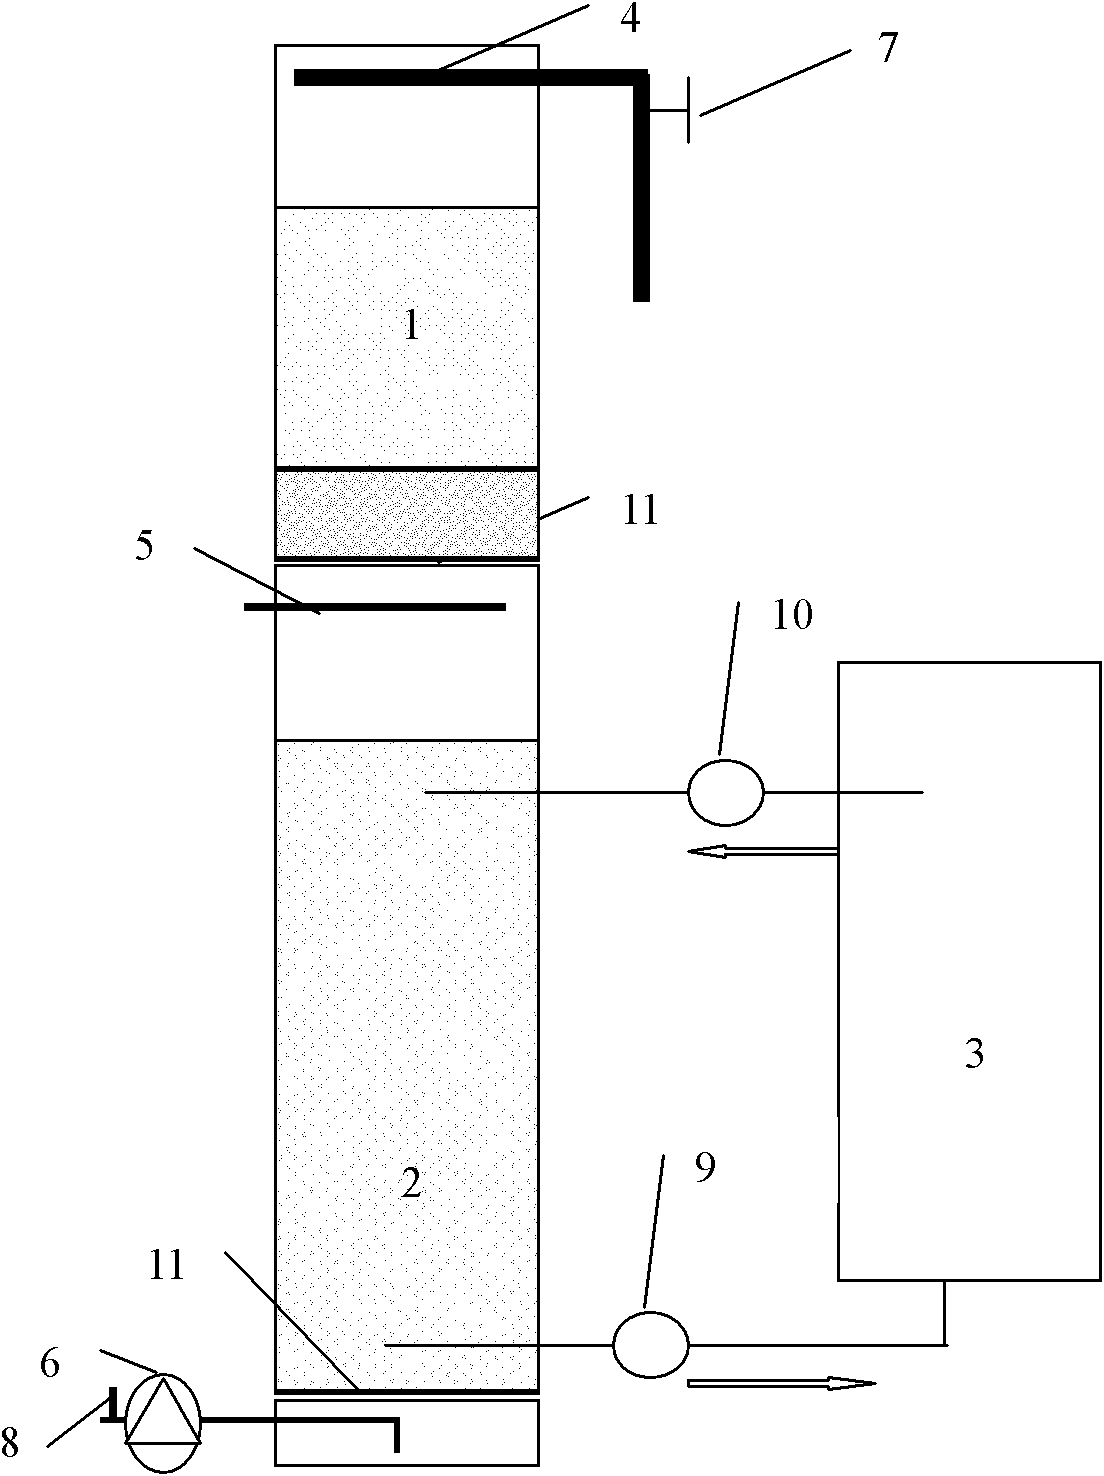 Processing device and processing method for removing nitrate from ground water